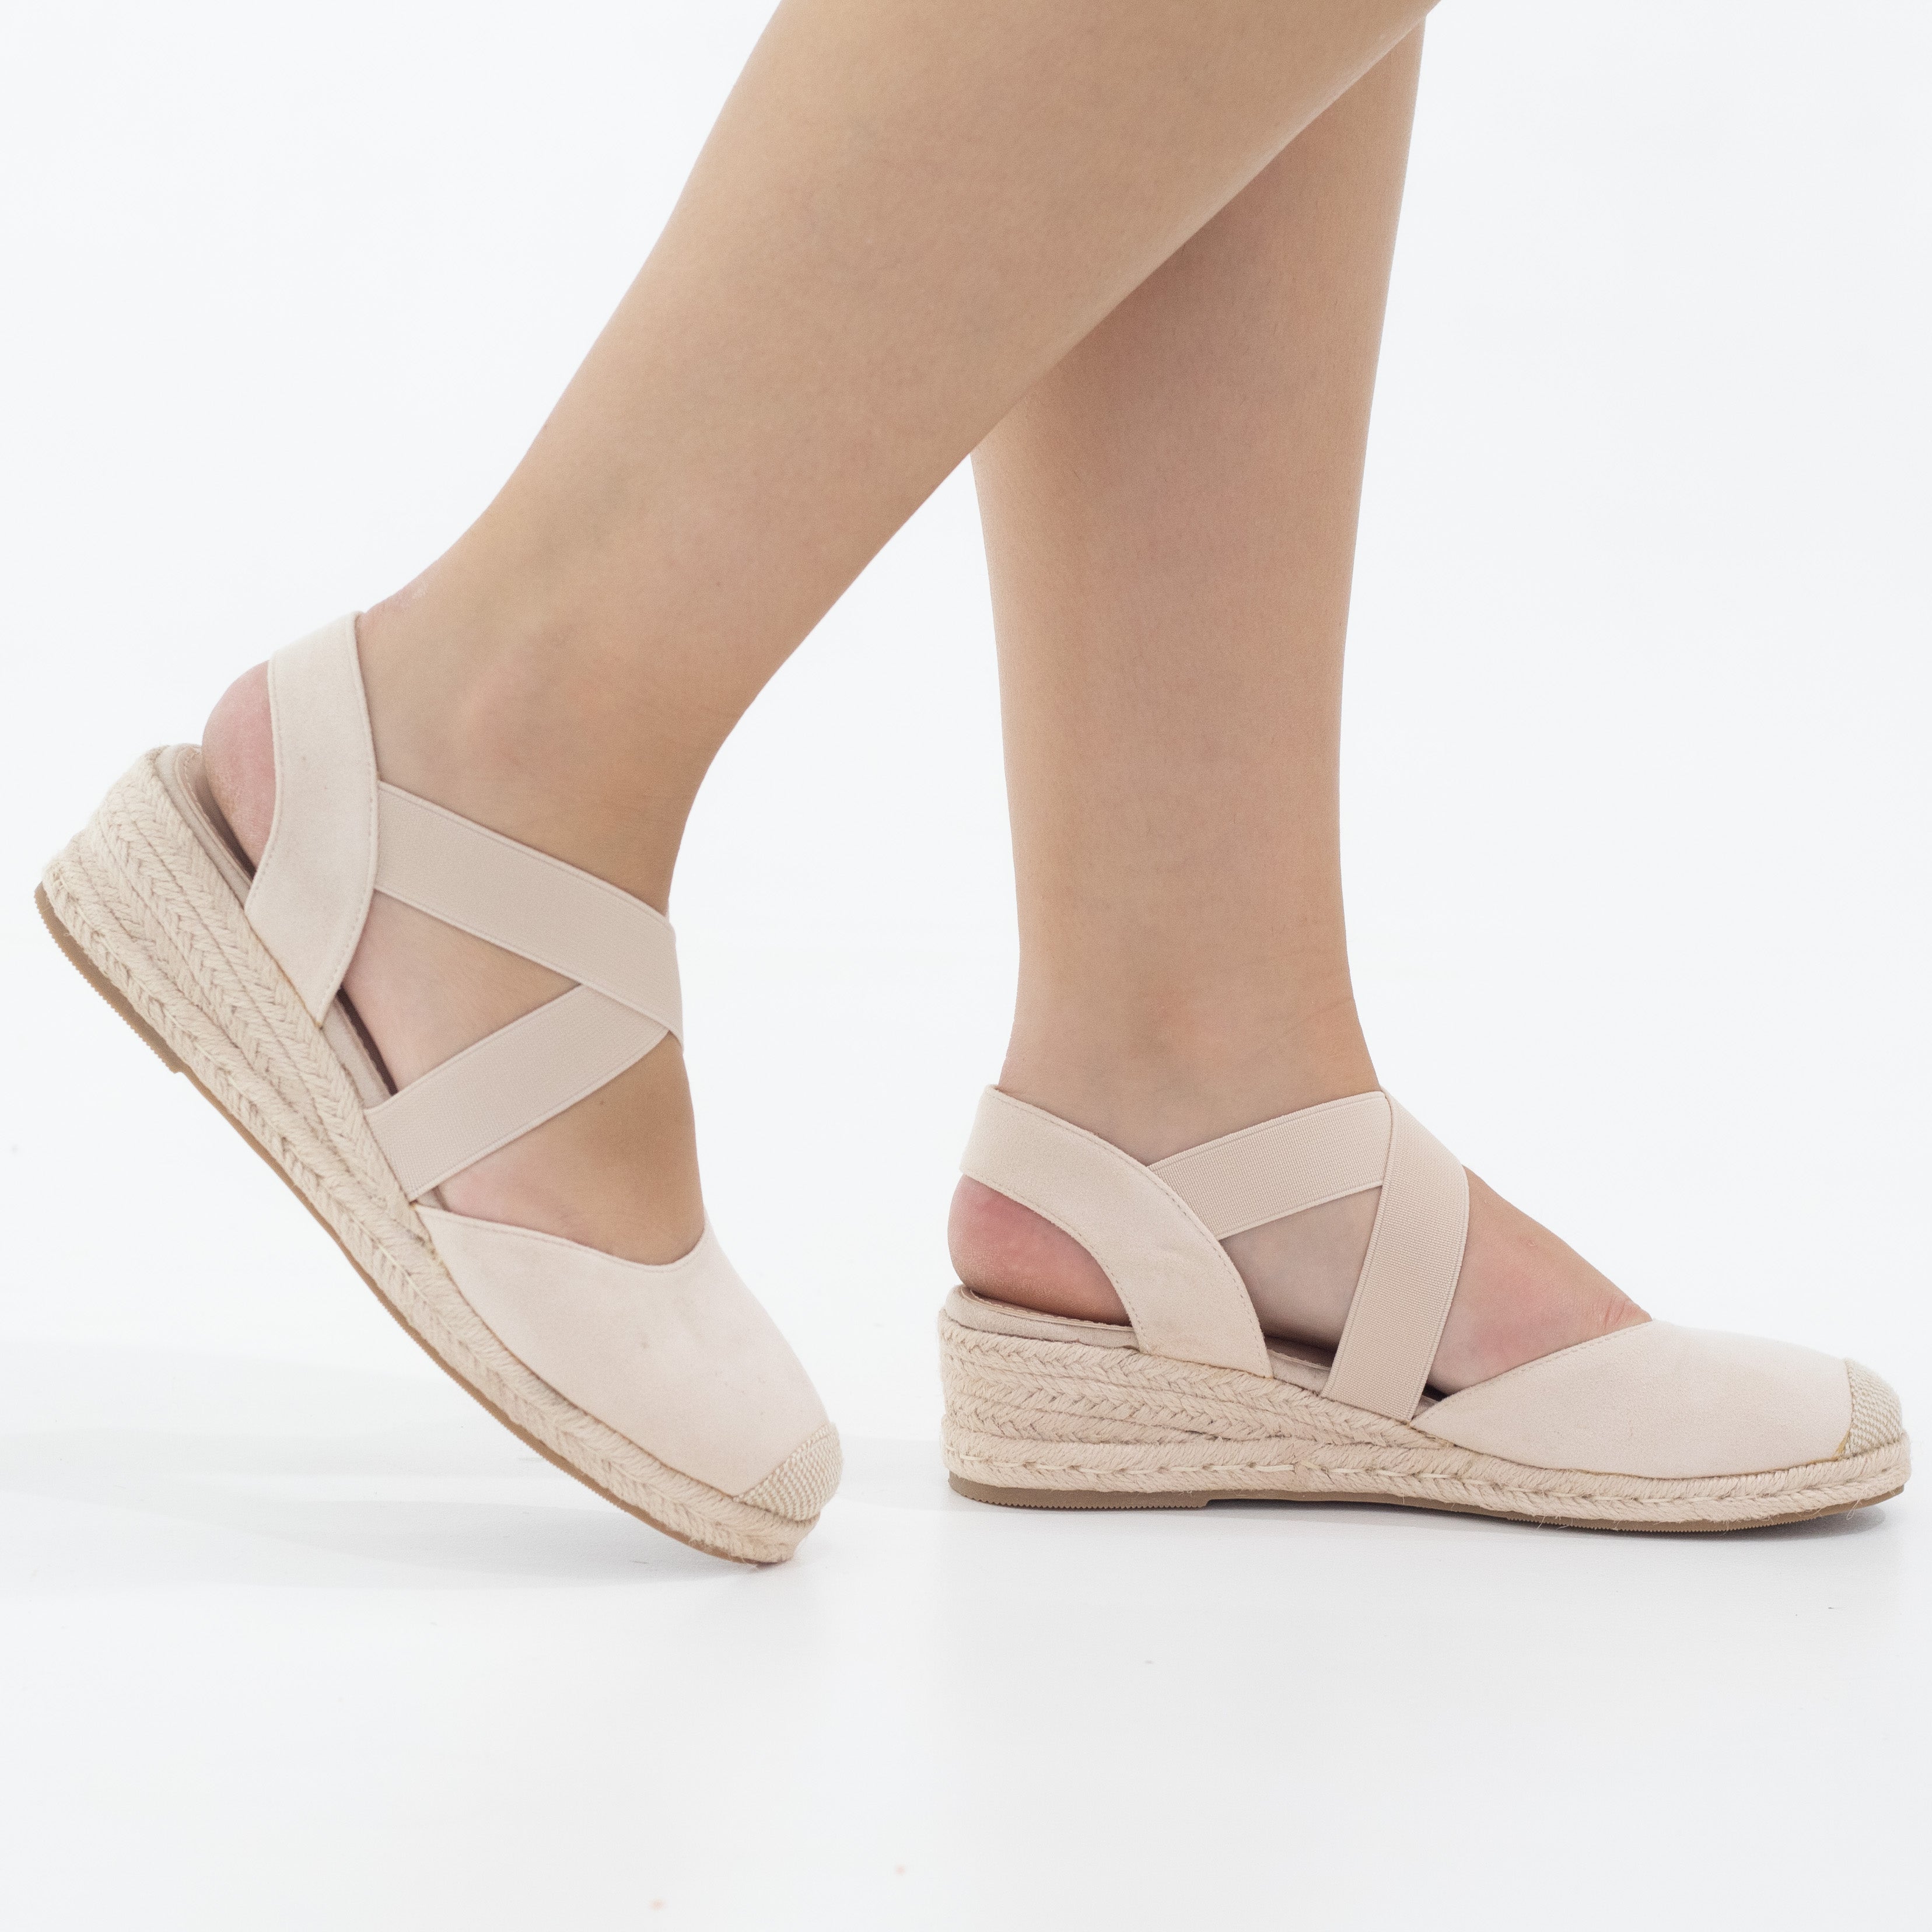 Buy DREAM PAIRS Women's Ankle Strap Closed Toe Espadrille Wedge Heels  Sandals, Nude, 5 at Amazon.in